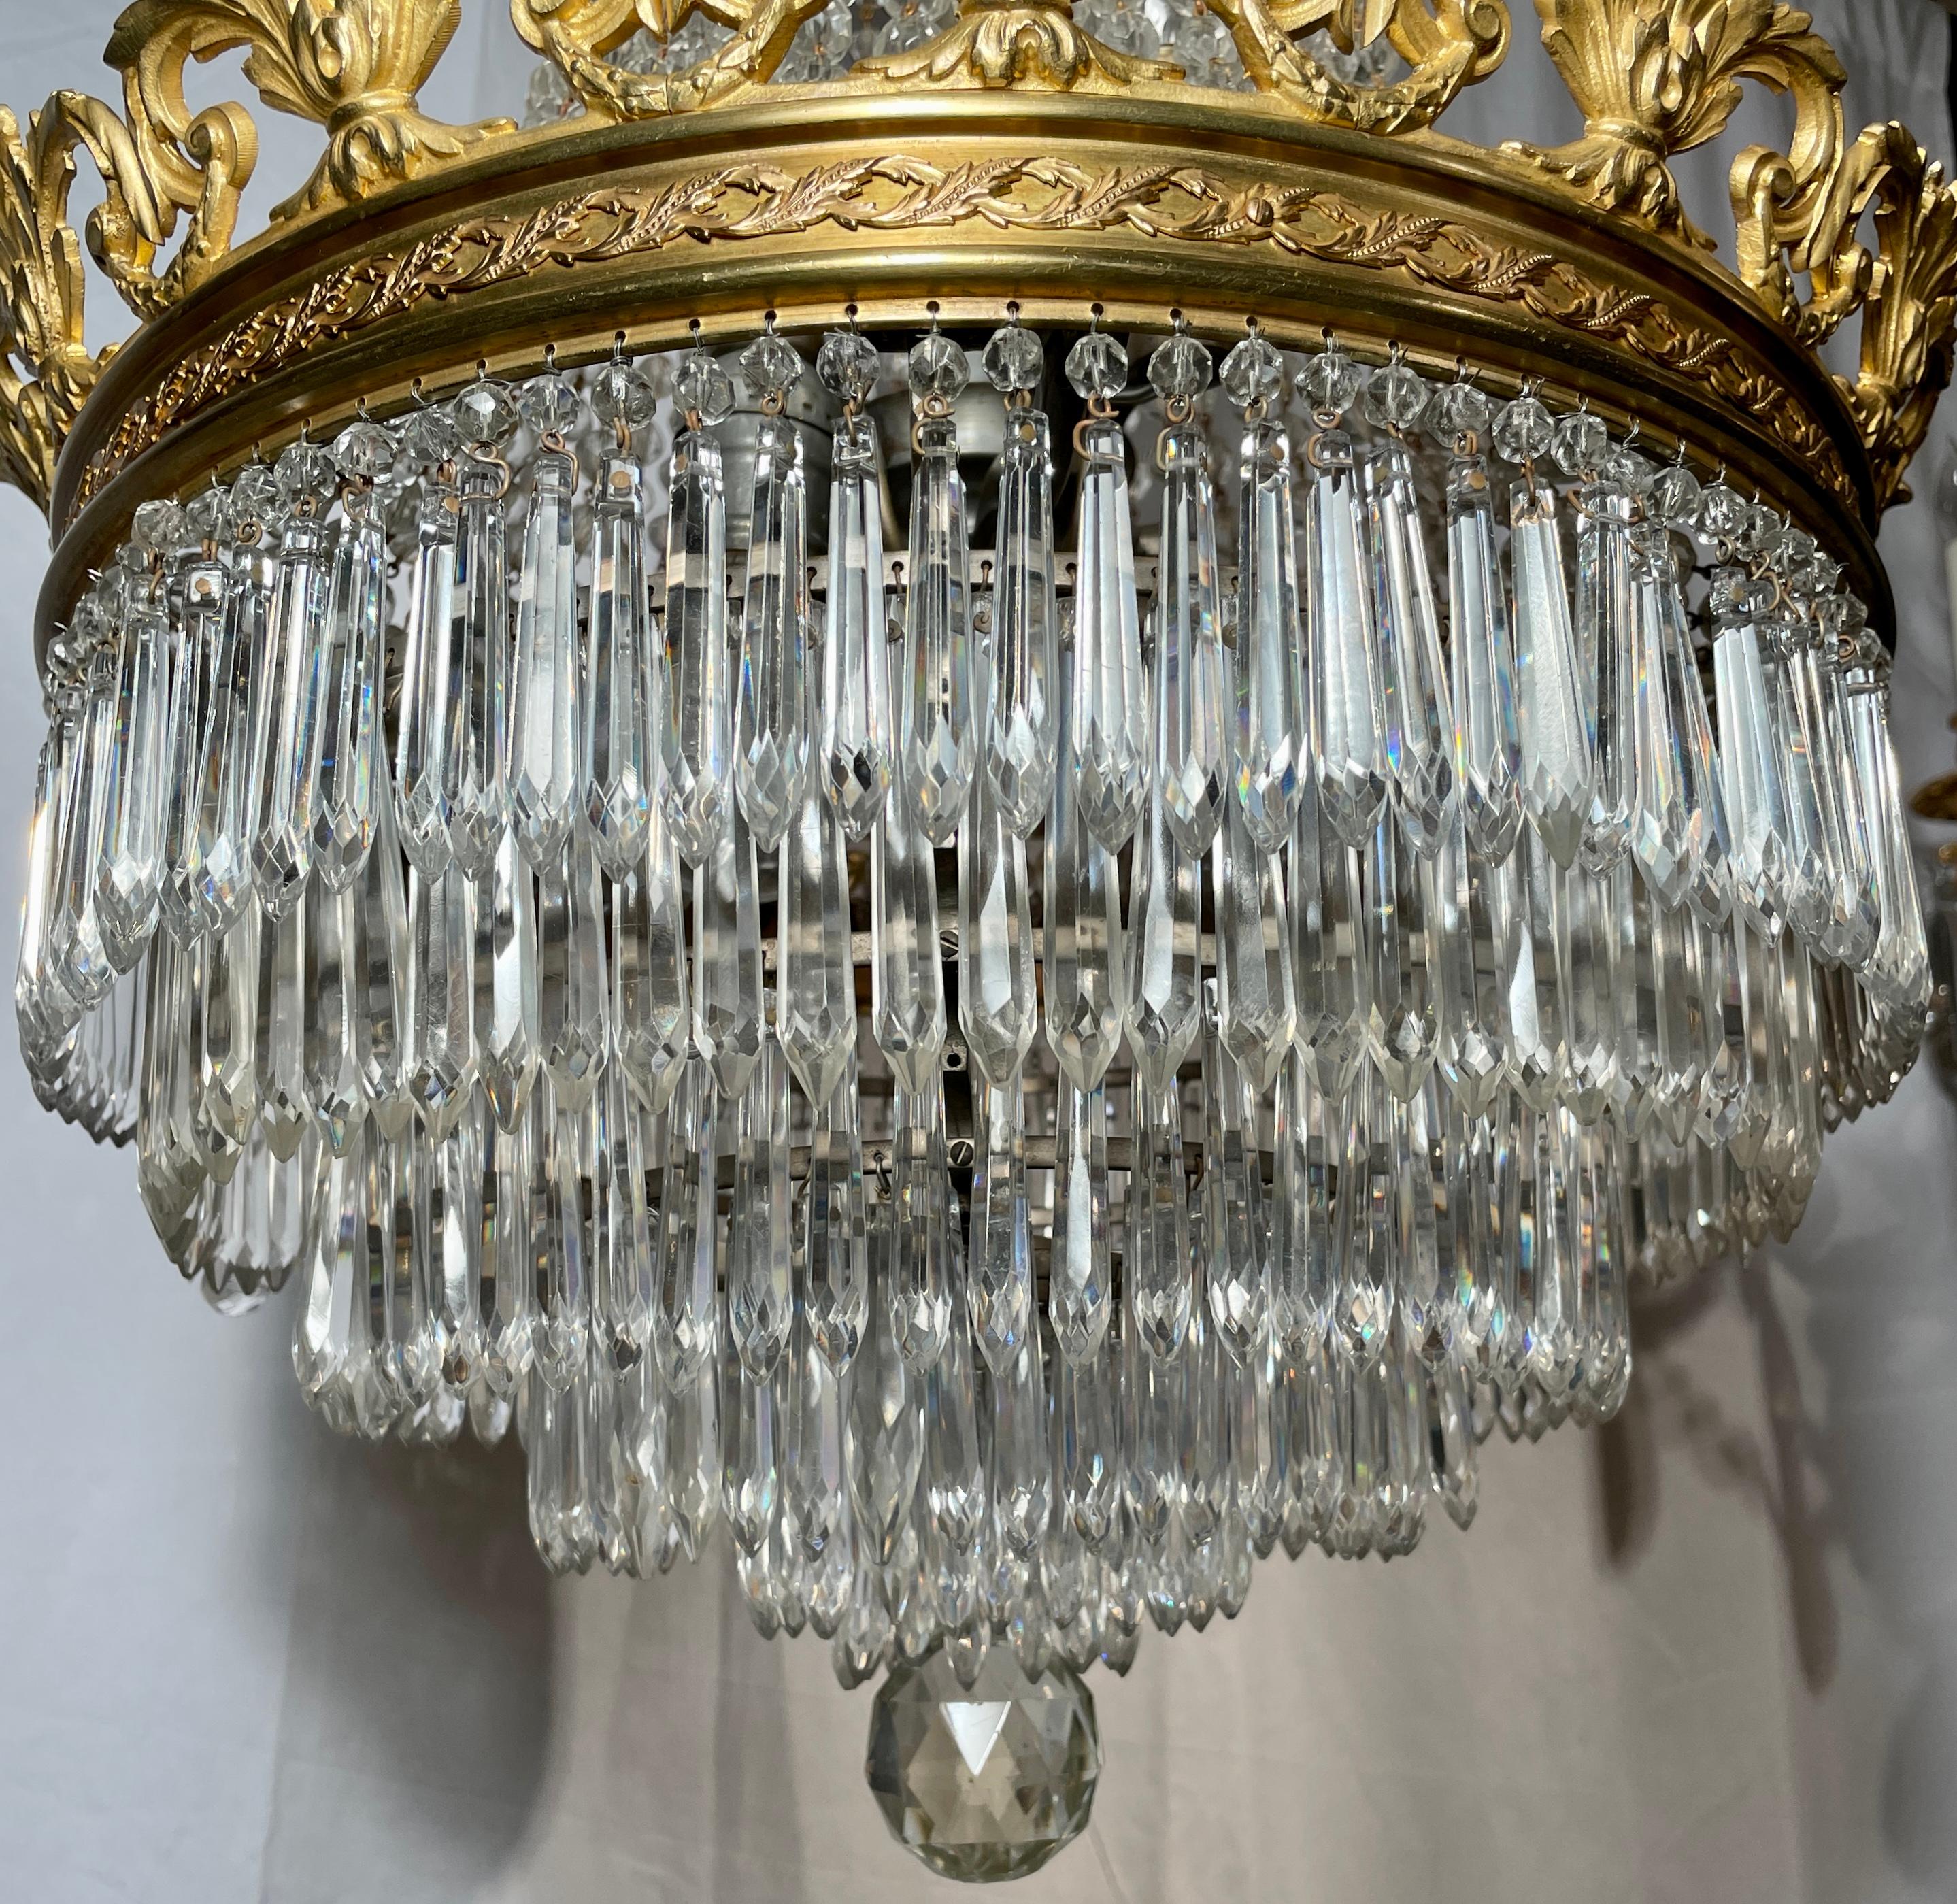 Antique French Baccarat Crystal and Gold Bronze Chandelier, Circa 1890s For Sale 1